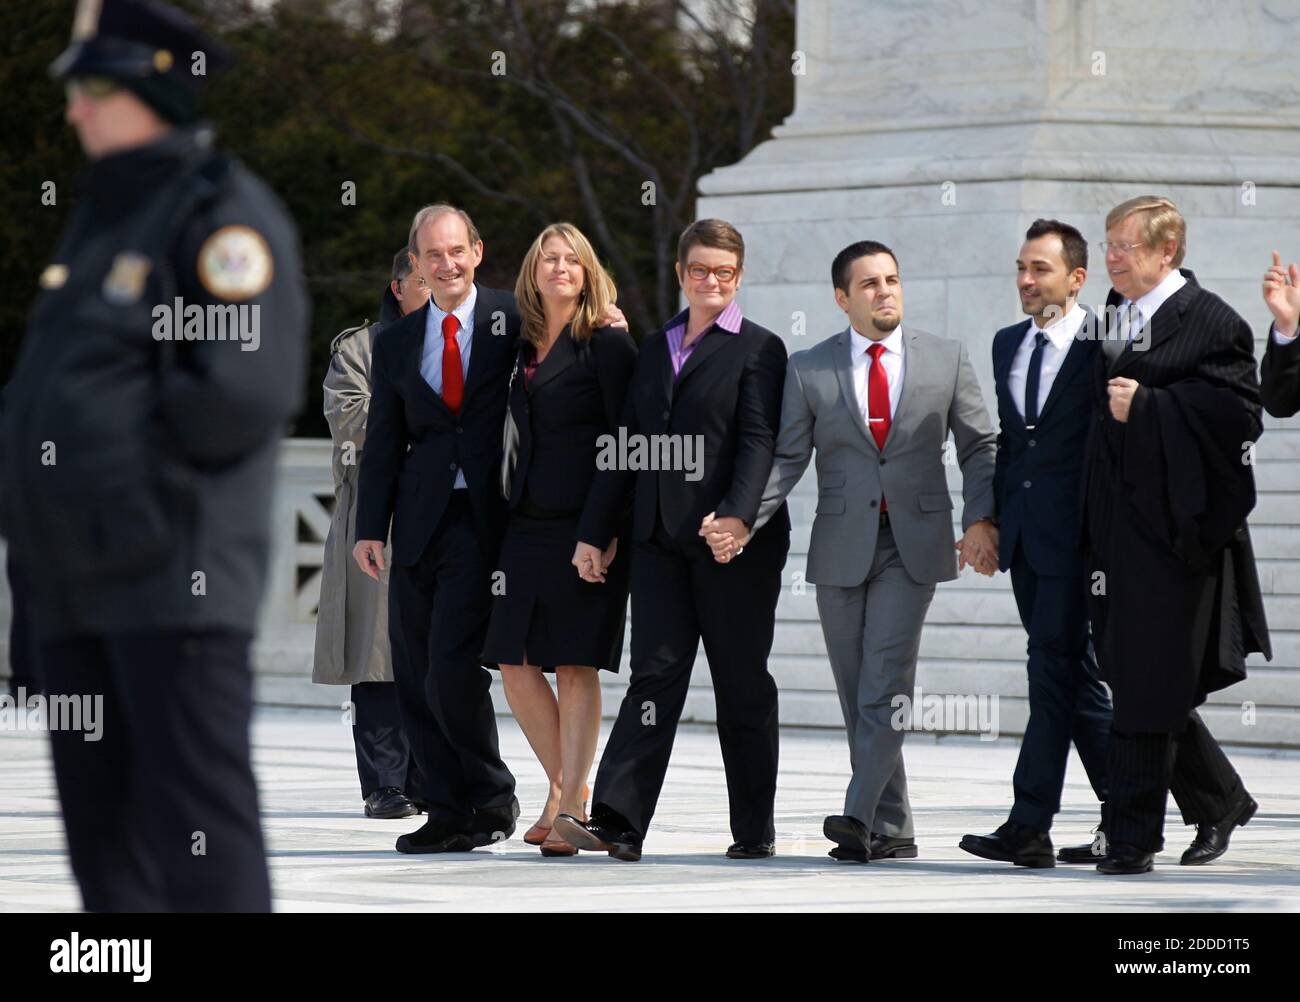 NO FILM, NO VIDEO, NO TV, NO DOCUMENTARY - Attorneys David Bois (left) and Ted Olson (right) walk out of the U.S. Supreme Court with plaintiffs, from left, Sandy Stier, Kris Perry, Jeff Zarillo, and Paul Katami, after California's Proposition 8 was argued before the Court in Washington, D.C., Teusday, March 26, 2013. Photo by Molly Riley/MCT/ABACAPRESS.COM Stock Photo